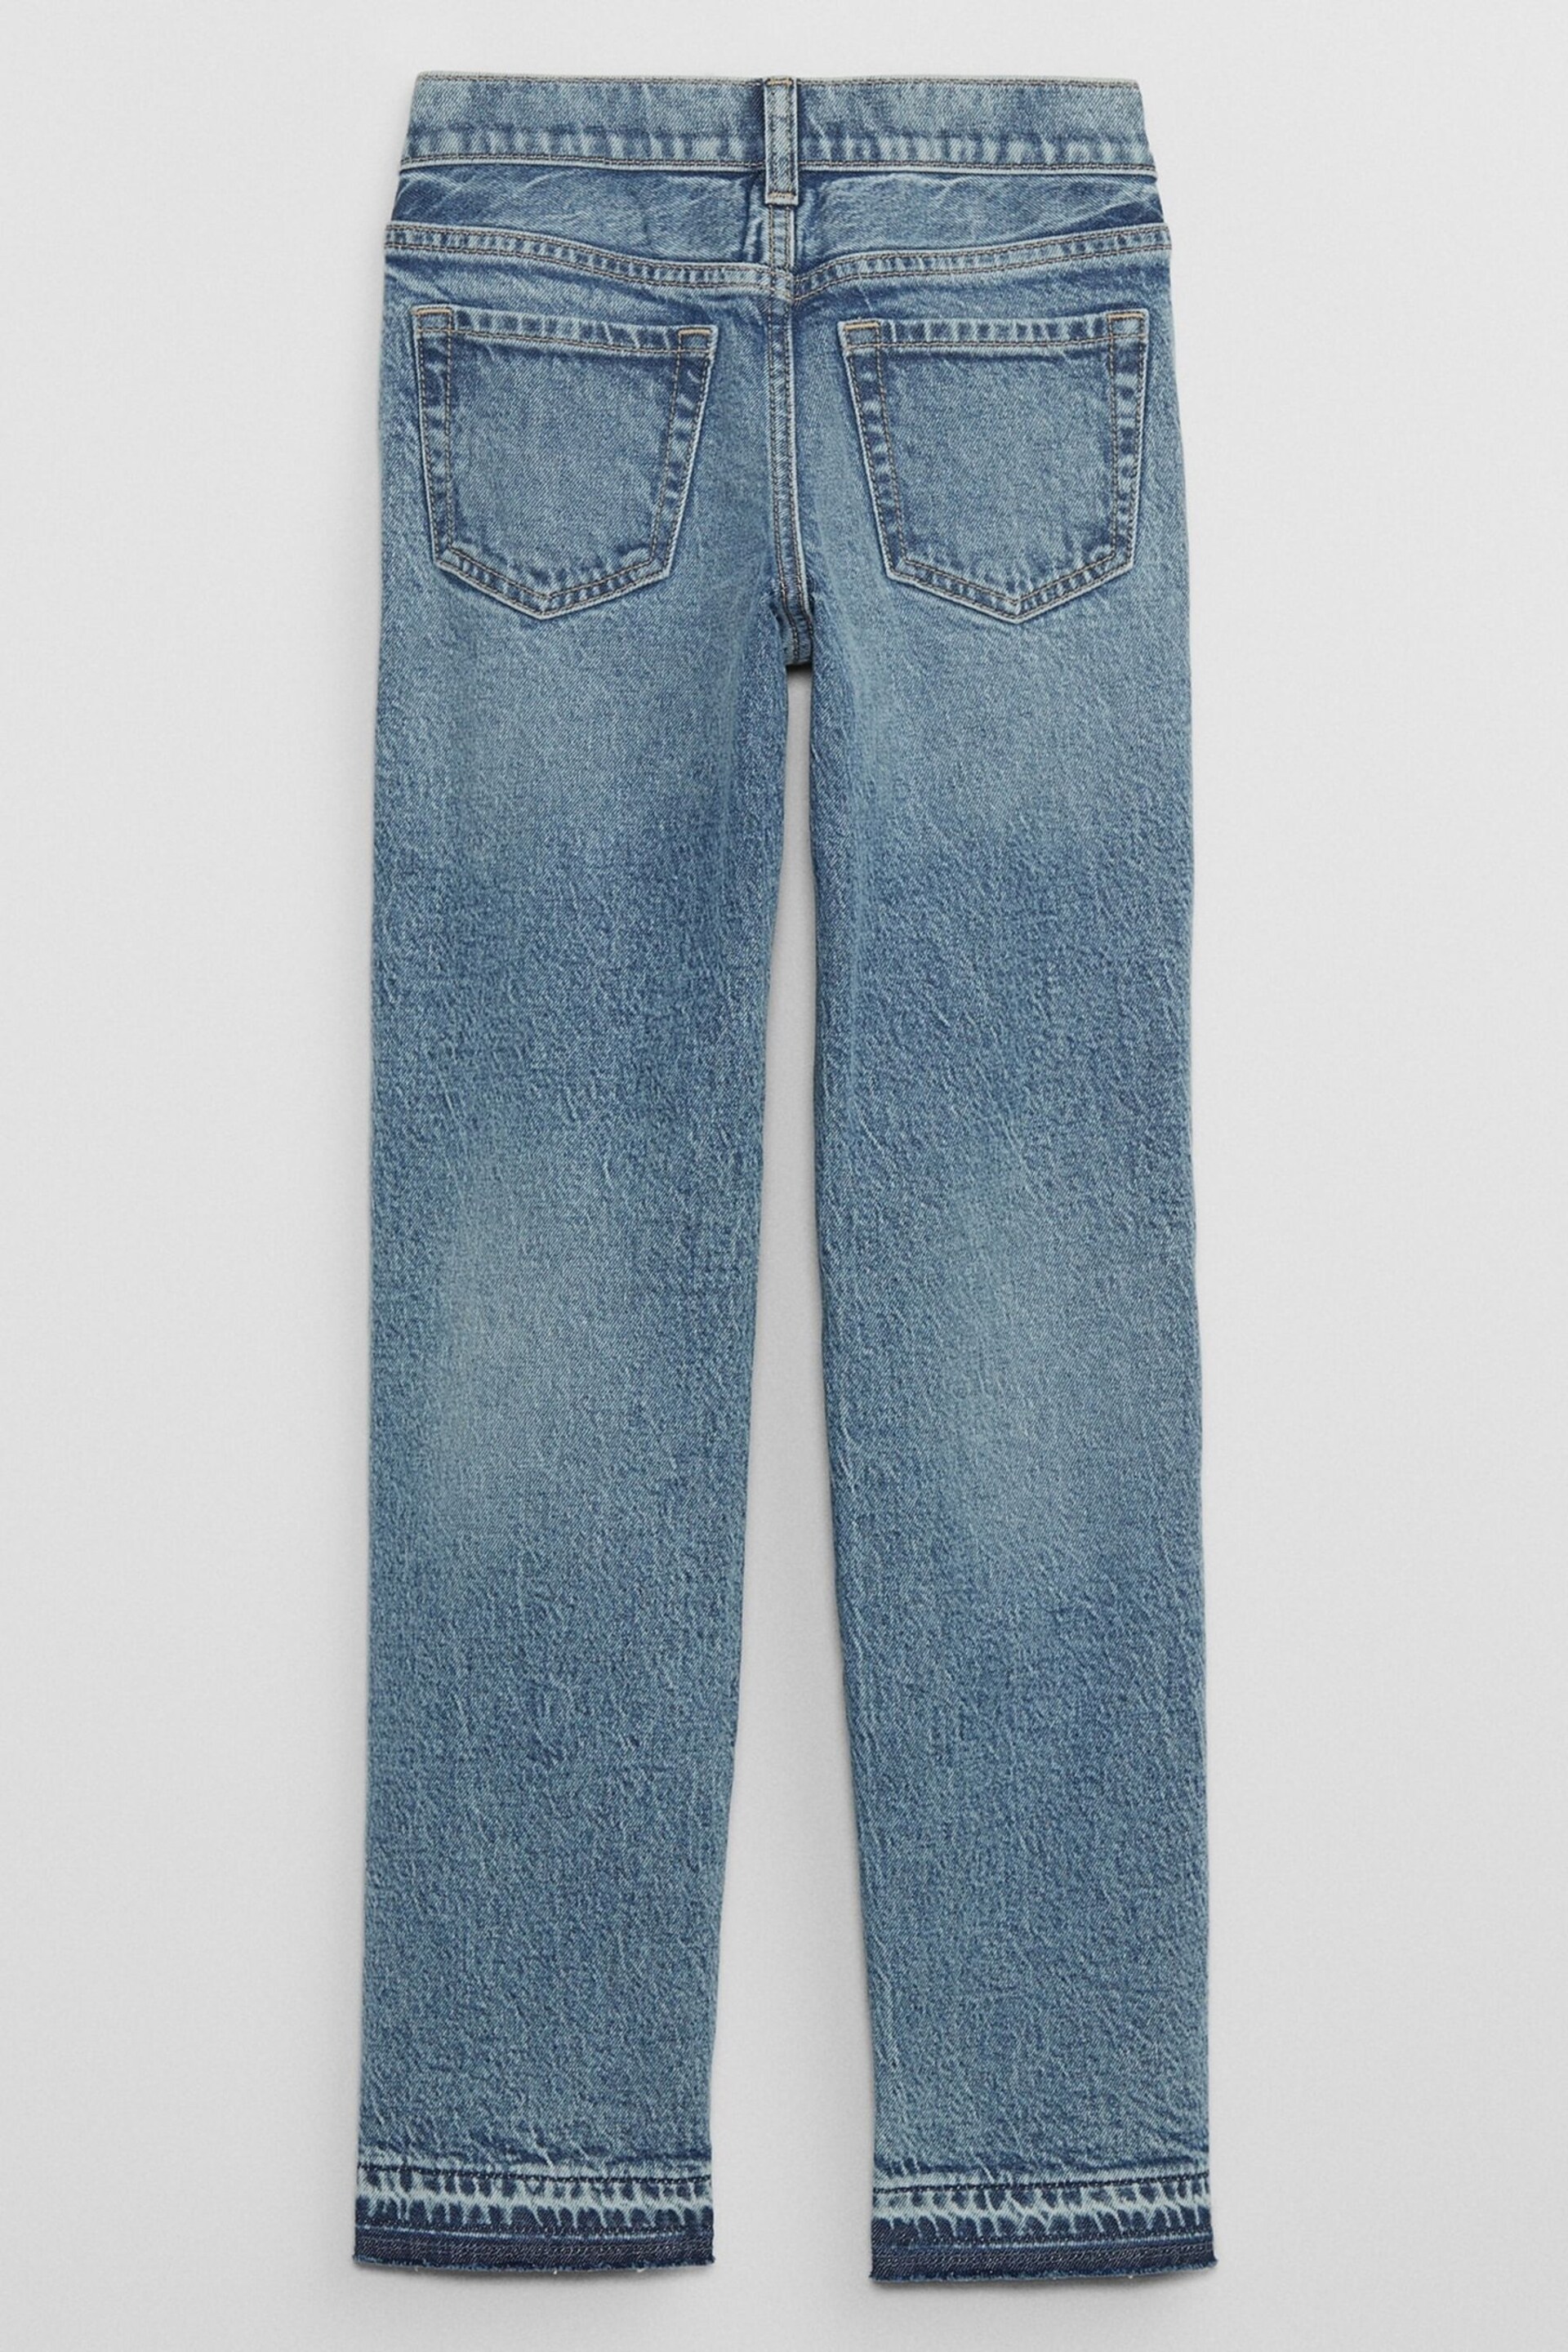 Gap Vintage Wash Blue Mid Rise Straight Washwell Jeans (5-14yrs) - Image 2 of 3